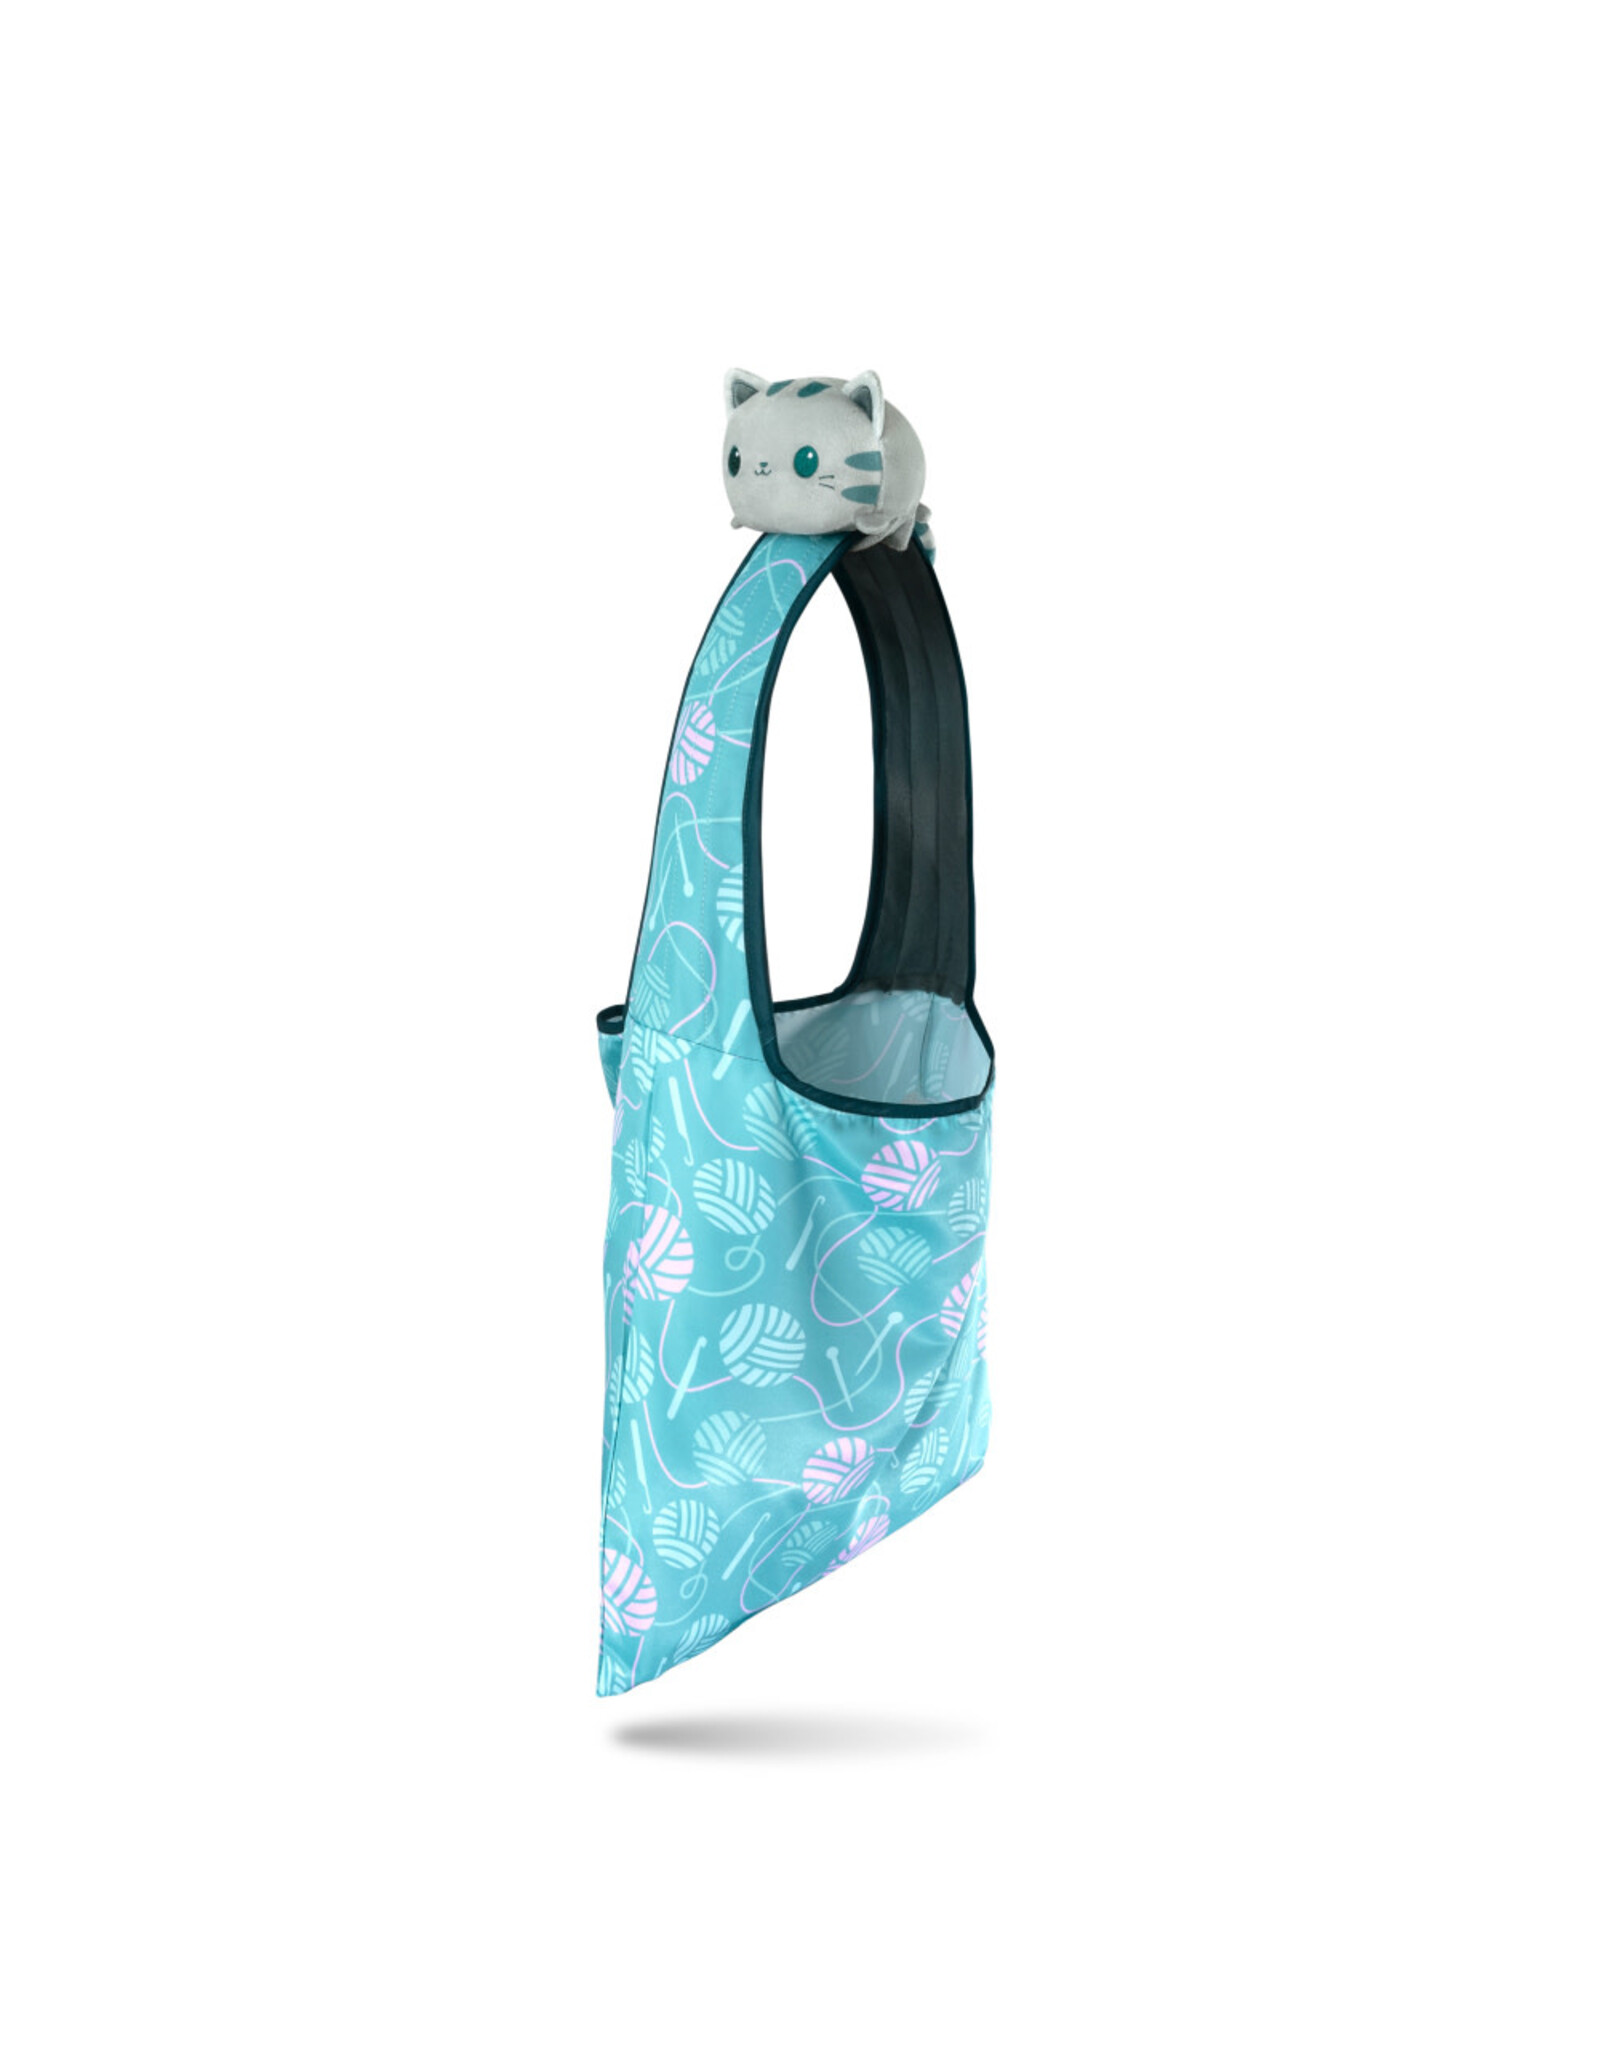 TeeTurtle Tote Bag with Plushie: (Light Blue KnittinG + Light Gray Cat)